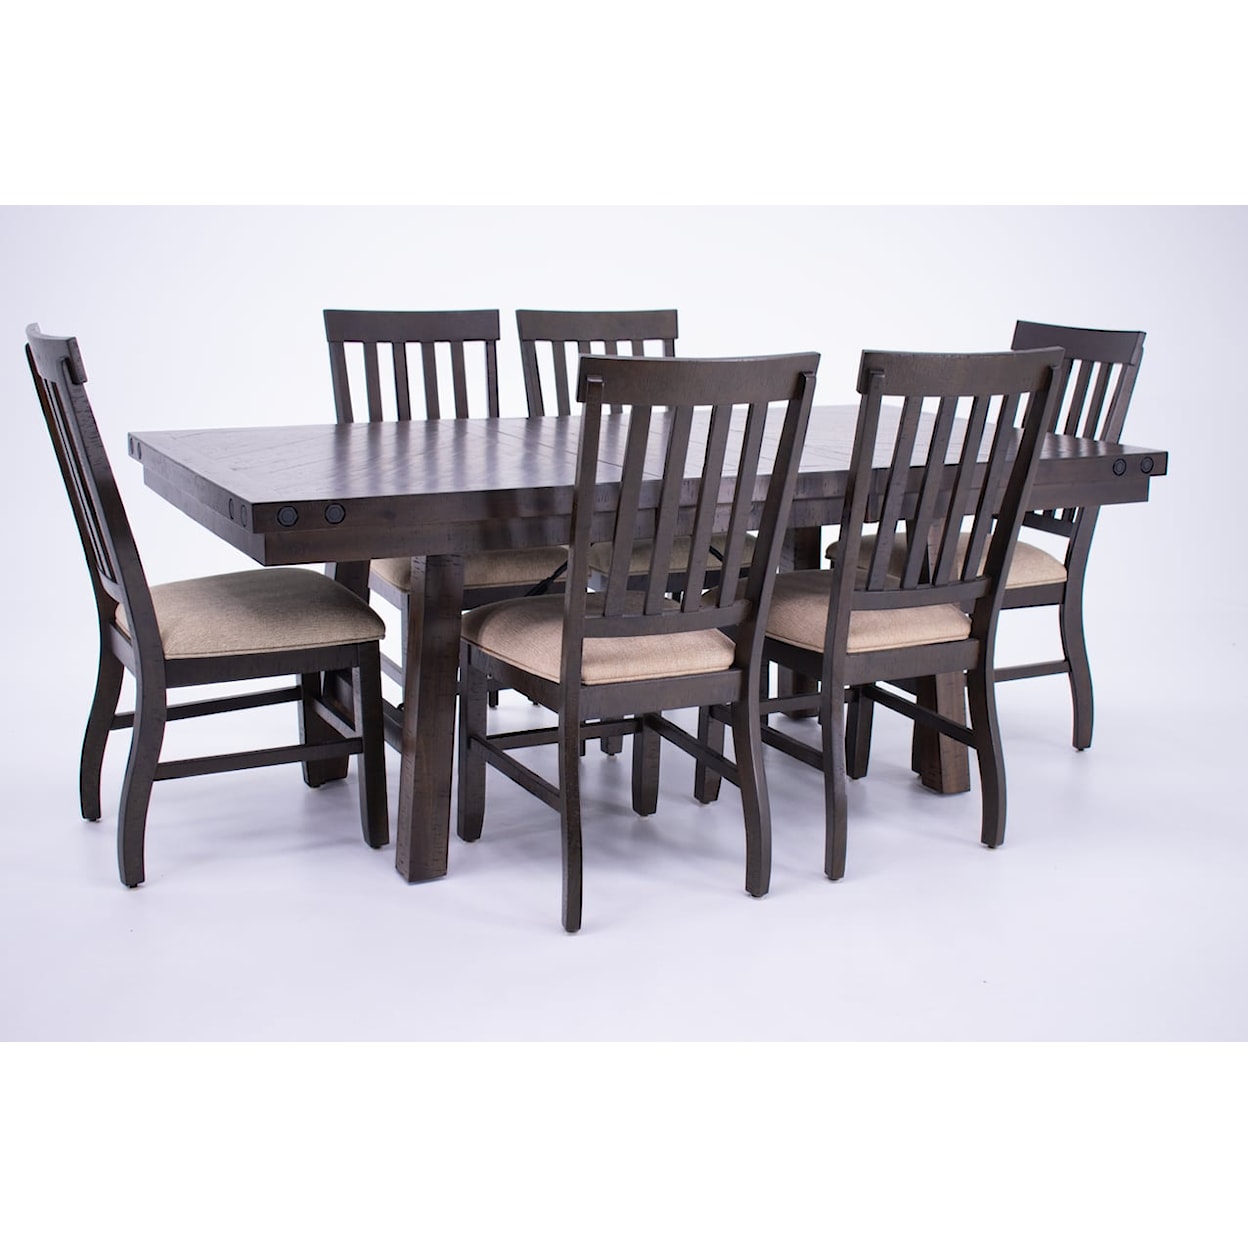 JB Home Ivy Ivy Dining Table & 6 Chairs